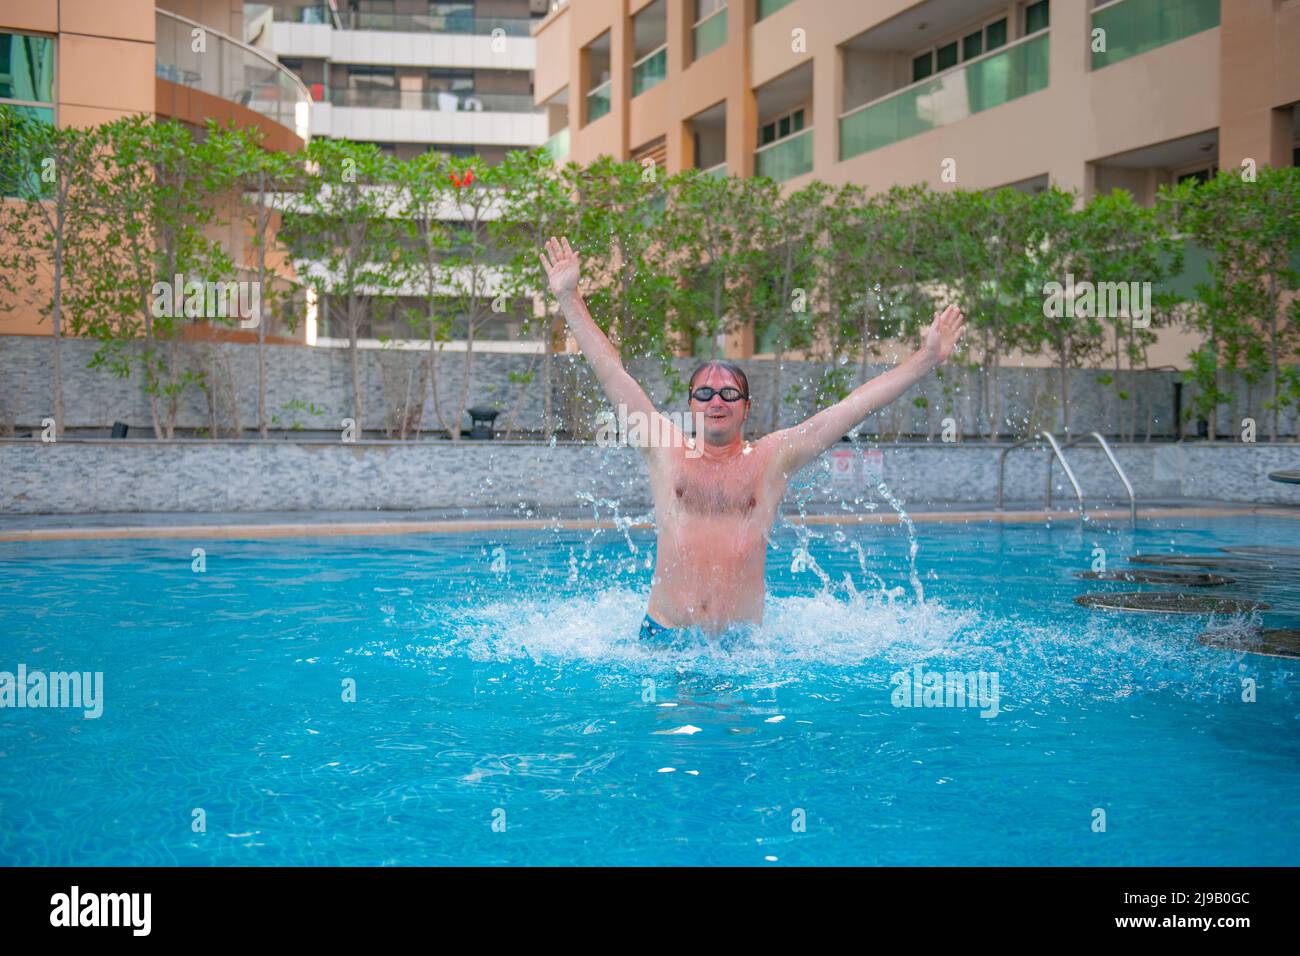 one swimmer jumps in a deep pool Stock Photo